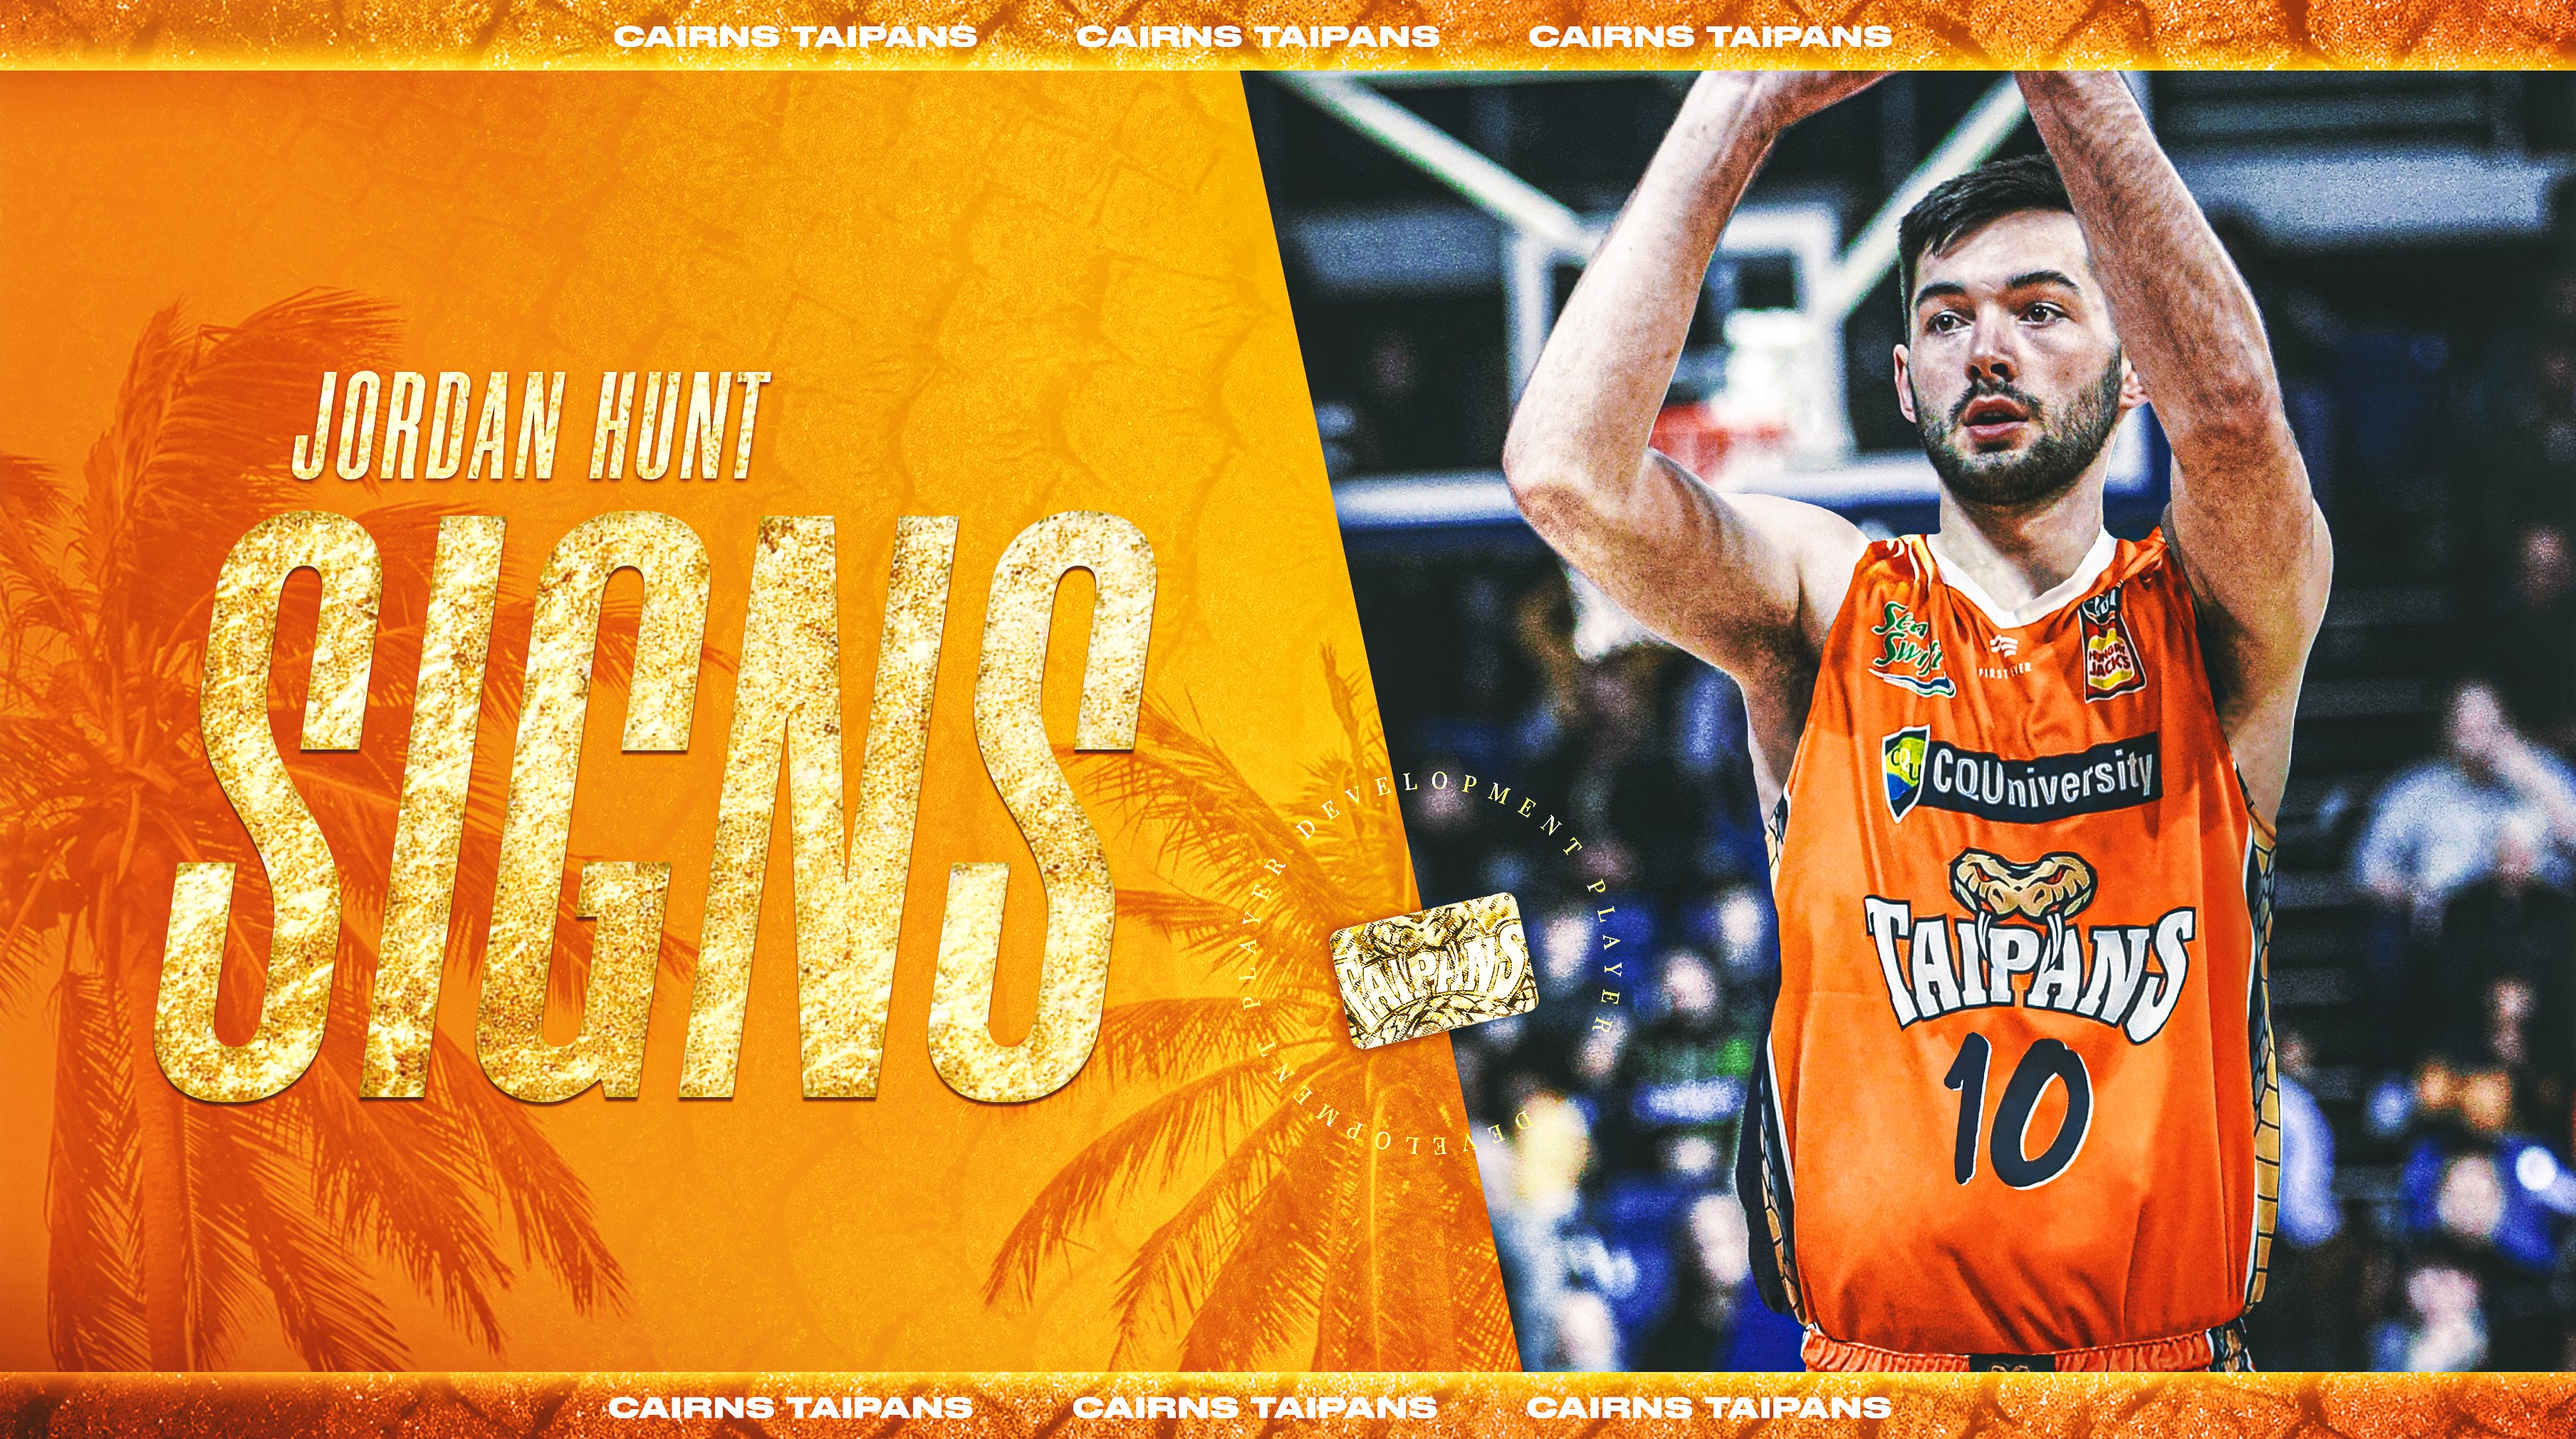 Cairns Taipans on Twitter: early Christmas 🎁 The Taipans have signed NZNBL Grand Final MVP Jordan Hunt as a development player. He won Championship alongside Taipans Jarrod Kenny and